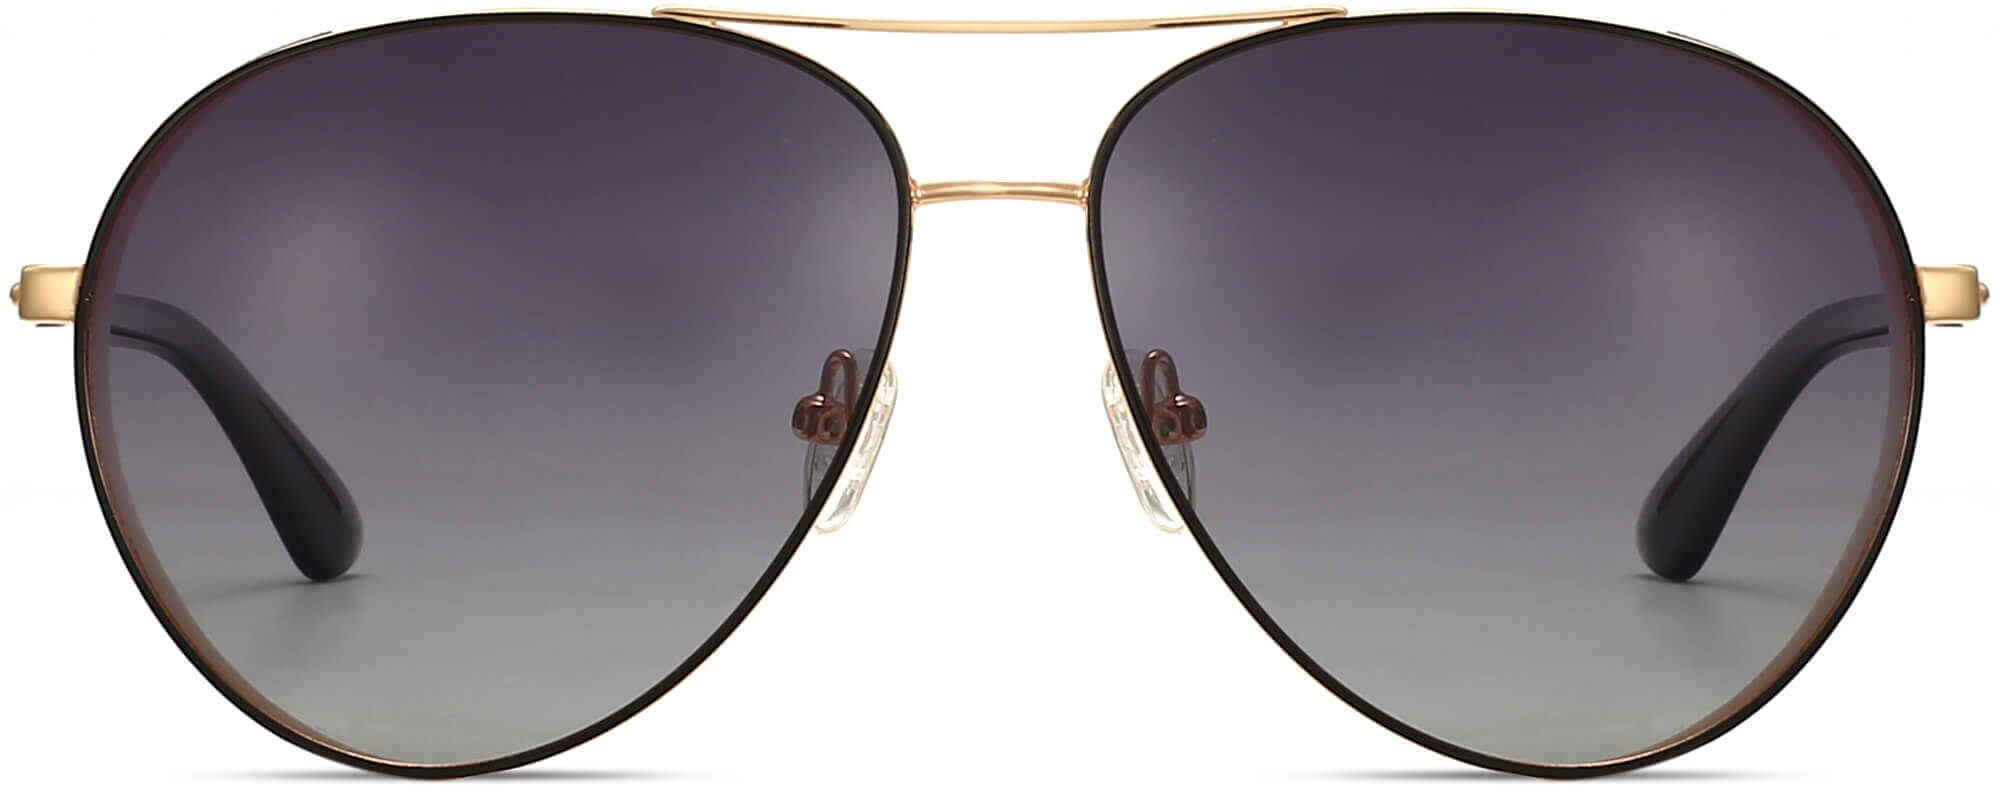 Taylor Black Stainless steel Sunglasses from ANRRI, front view